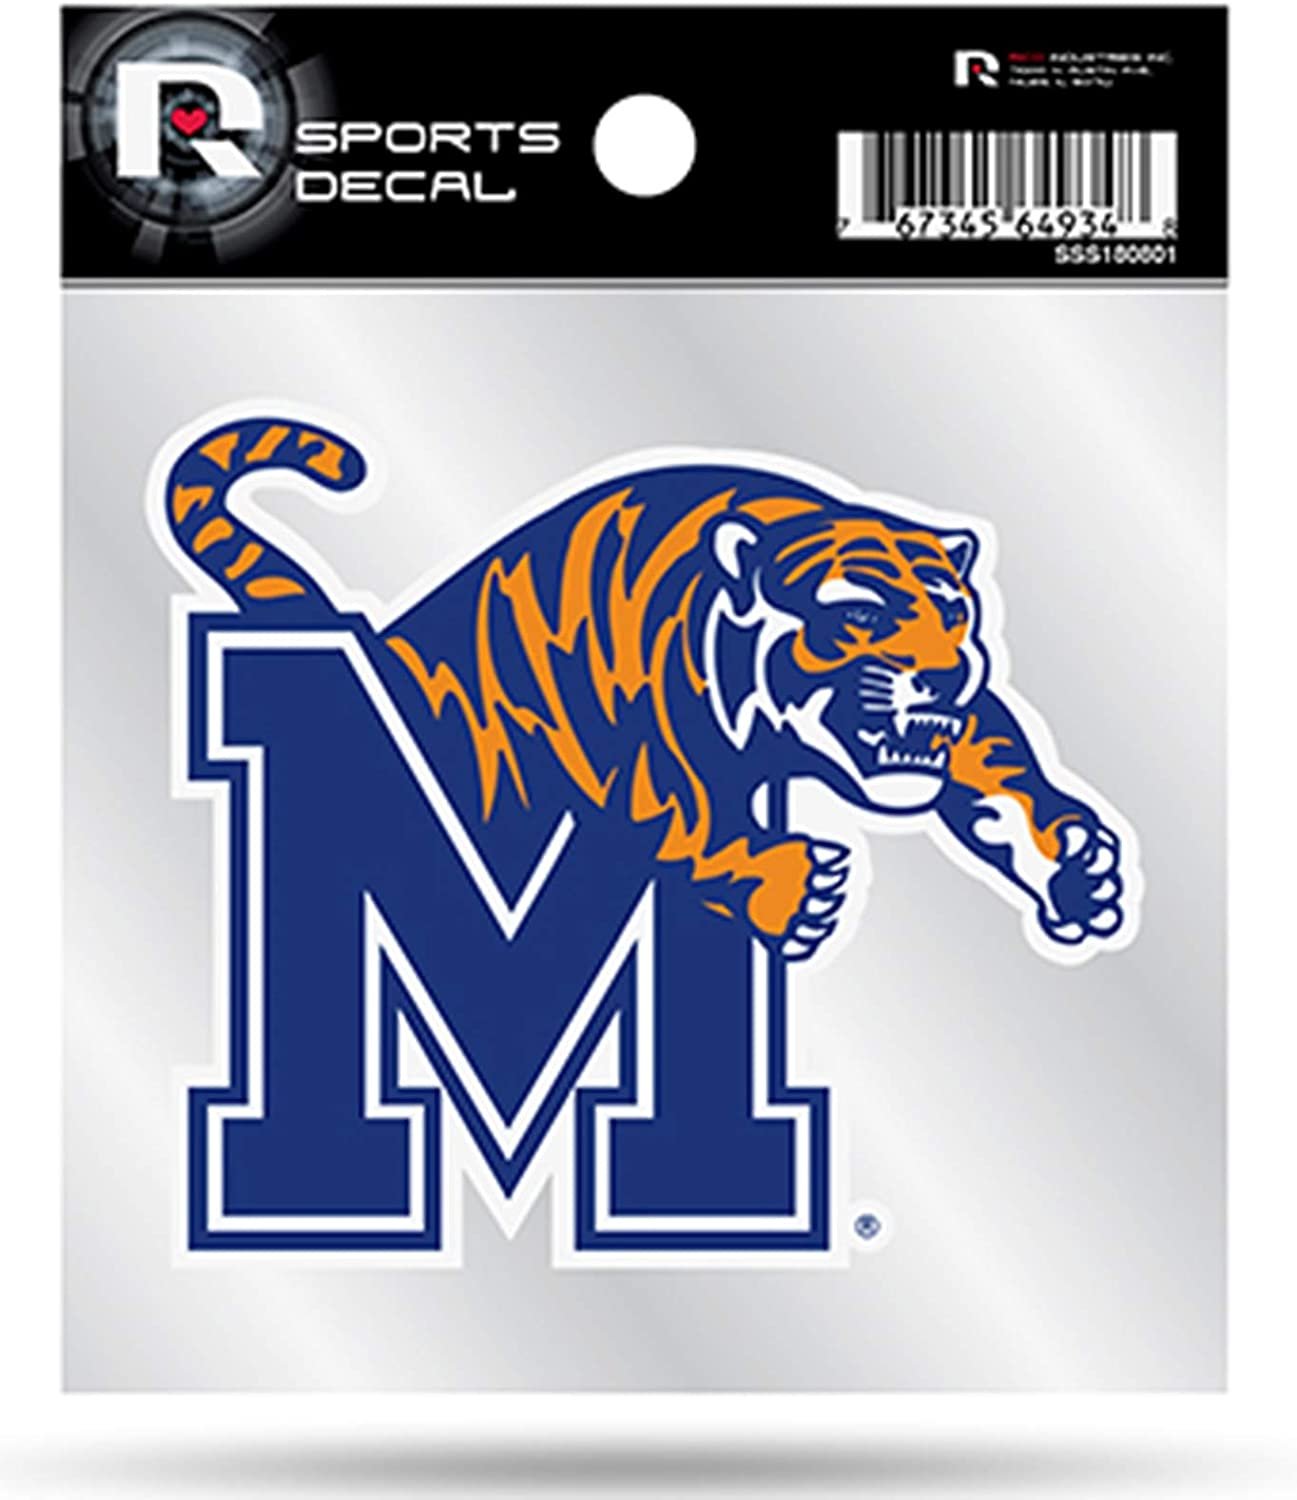 Memphis Tigers Premium 4x4 Decal with Clear Backing Flat Vinyl Auto Home Sticker University of